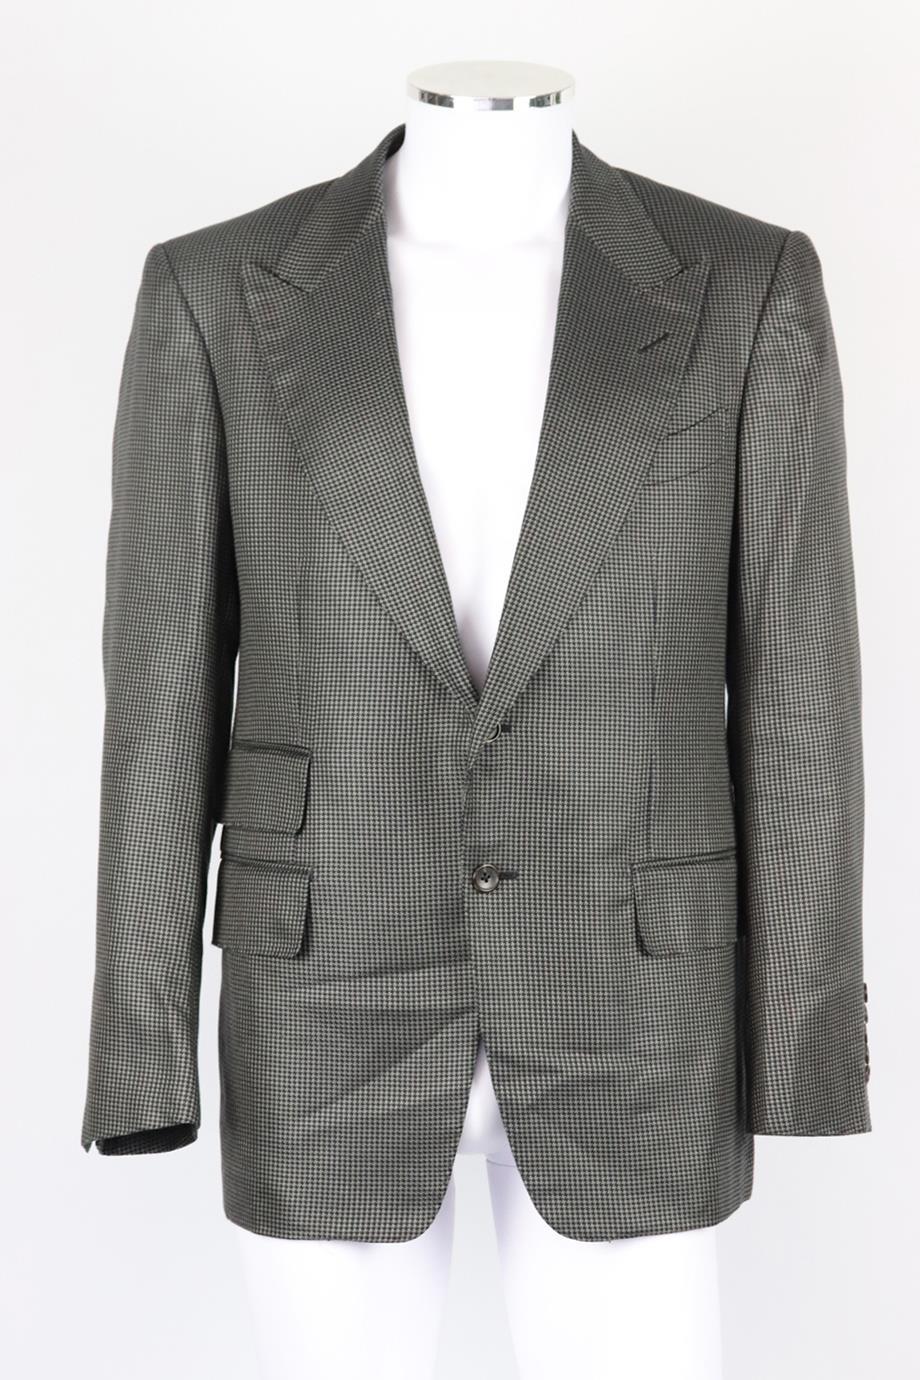 Tom Ford men's houndstooth cotton and silk blend blazer. Tonal-grey. Long sleeve, v-neck. Button fastening at front. 51% Cotton, 49% silk; lining: 50% silk, 50% rayon. Size: IT 52 (XLarge, EU 52, UK/US Chest 42). Shoulder to shoulder: 17 in. Chest: